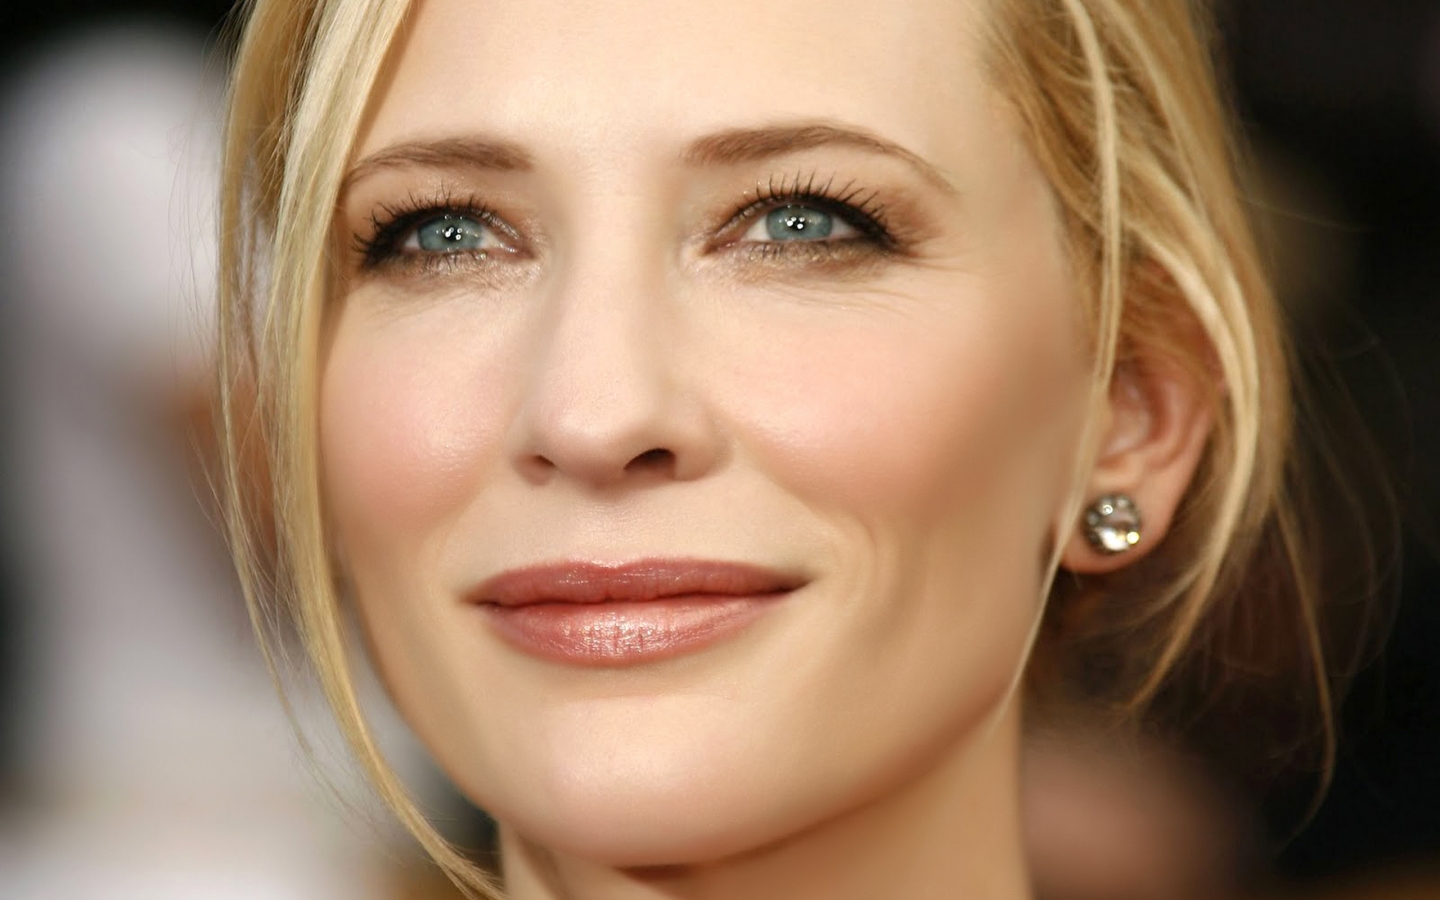 Cate Blanchett Look for 1440 x 900 widescreen resolution